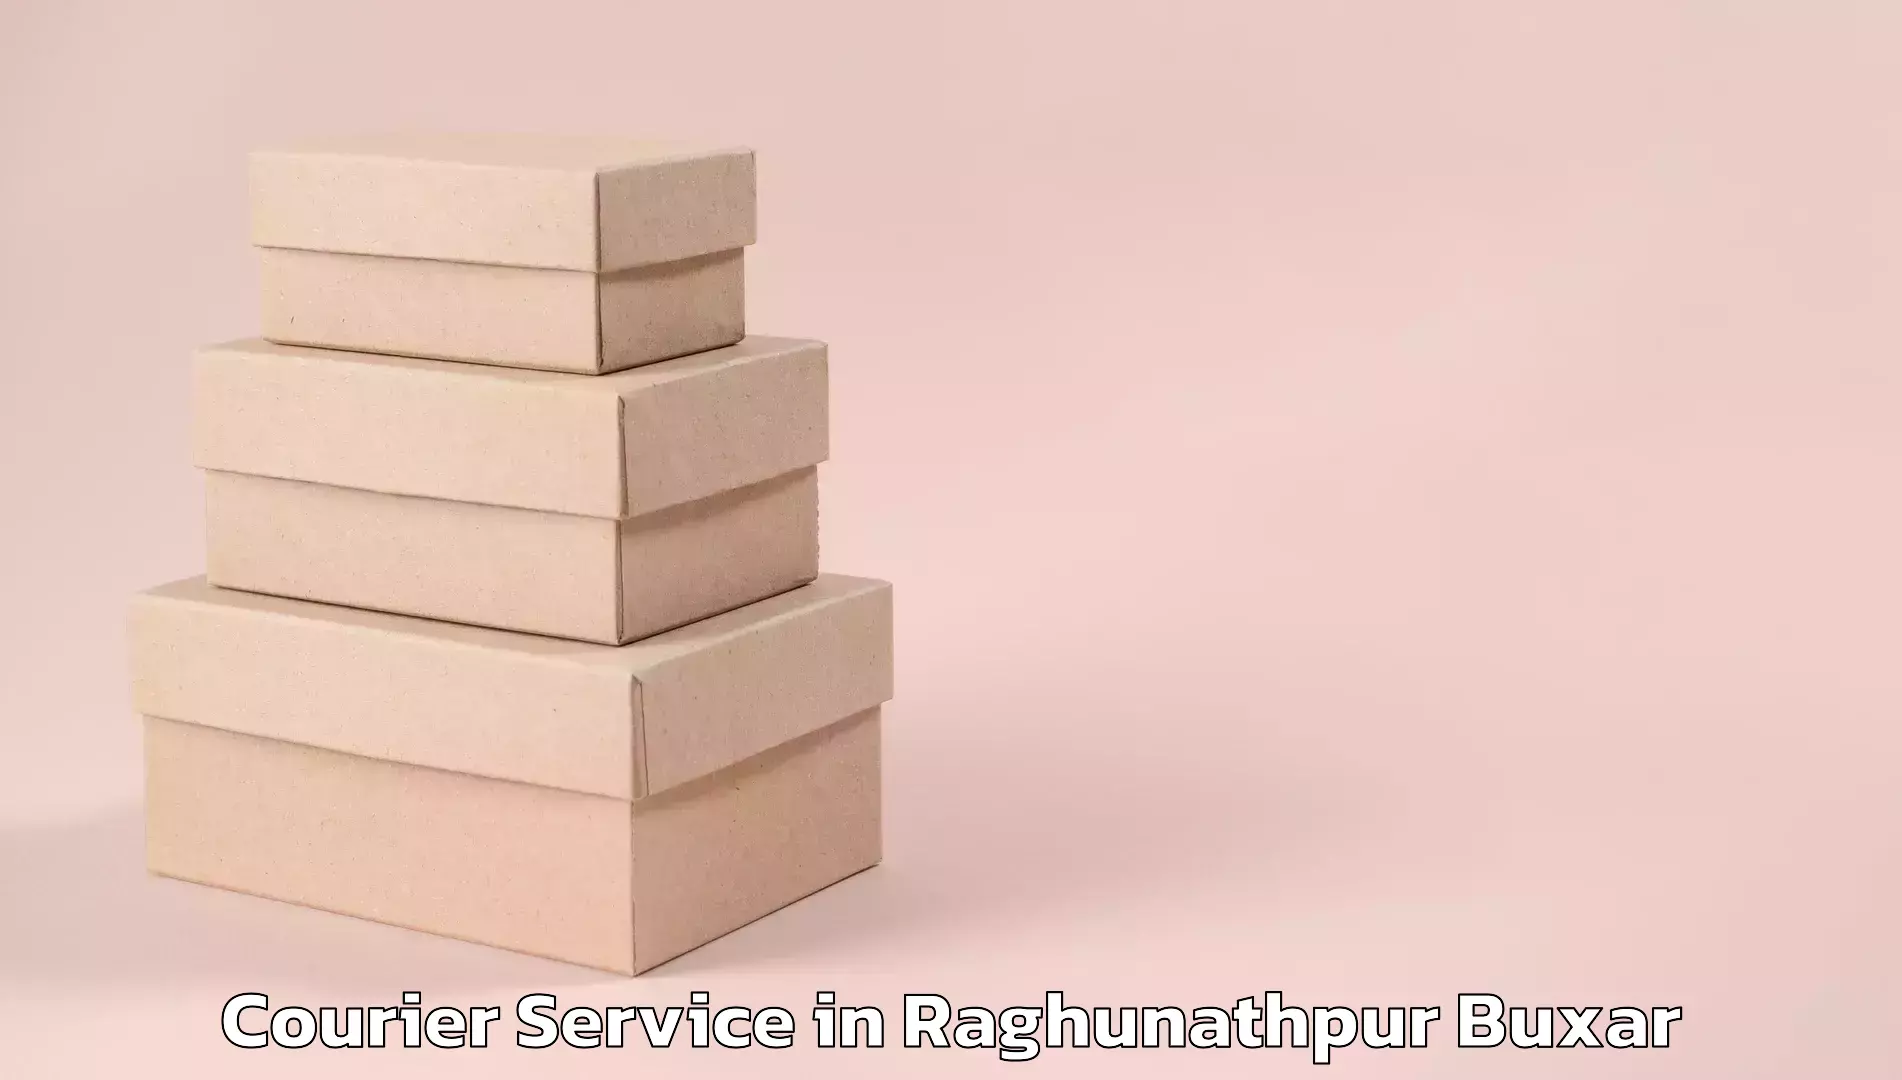 Express package delivery in Raghunathpur Buxar